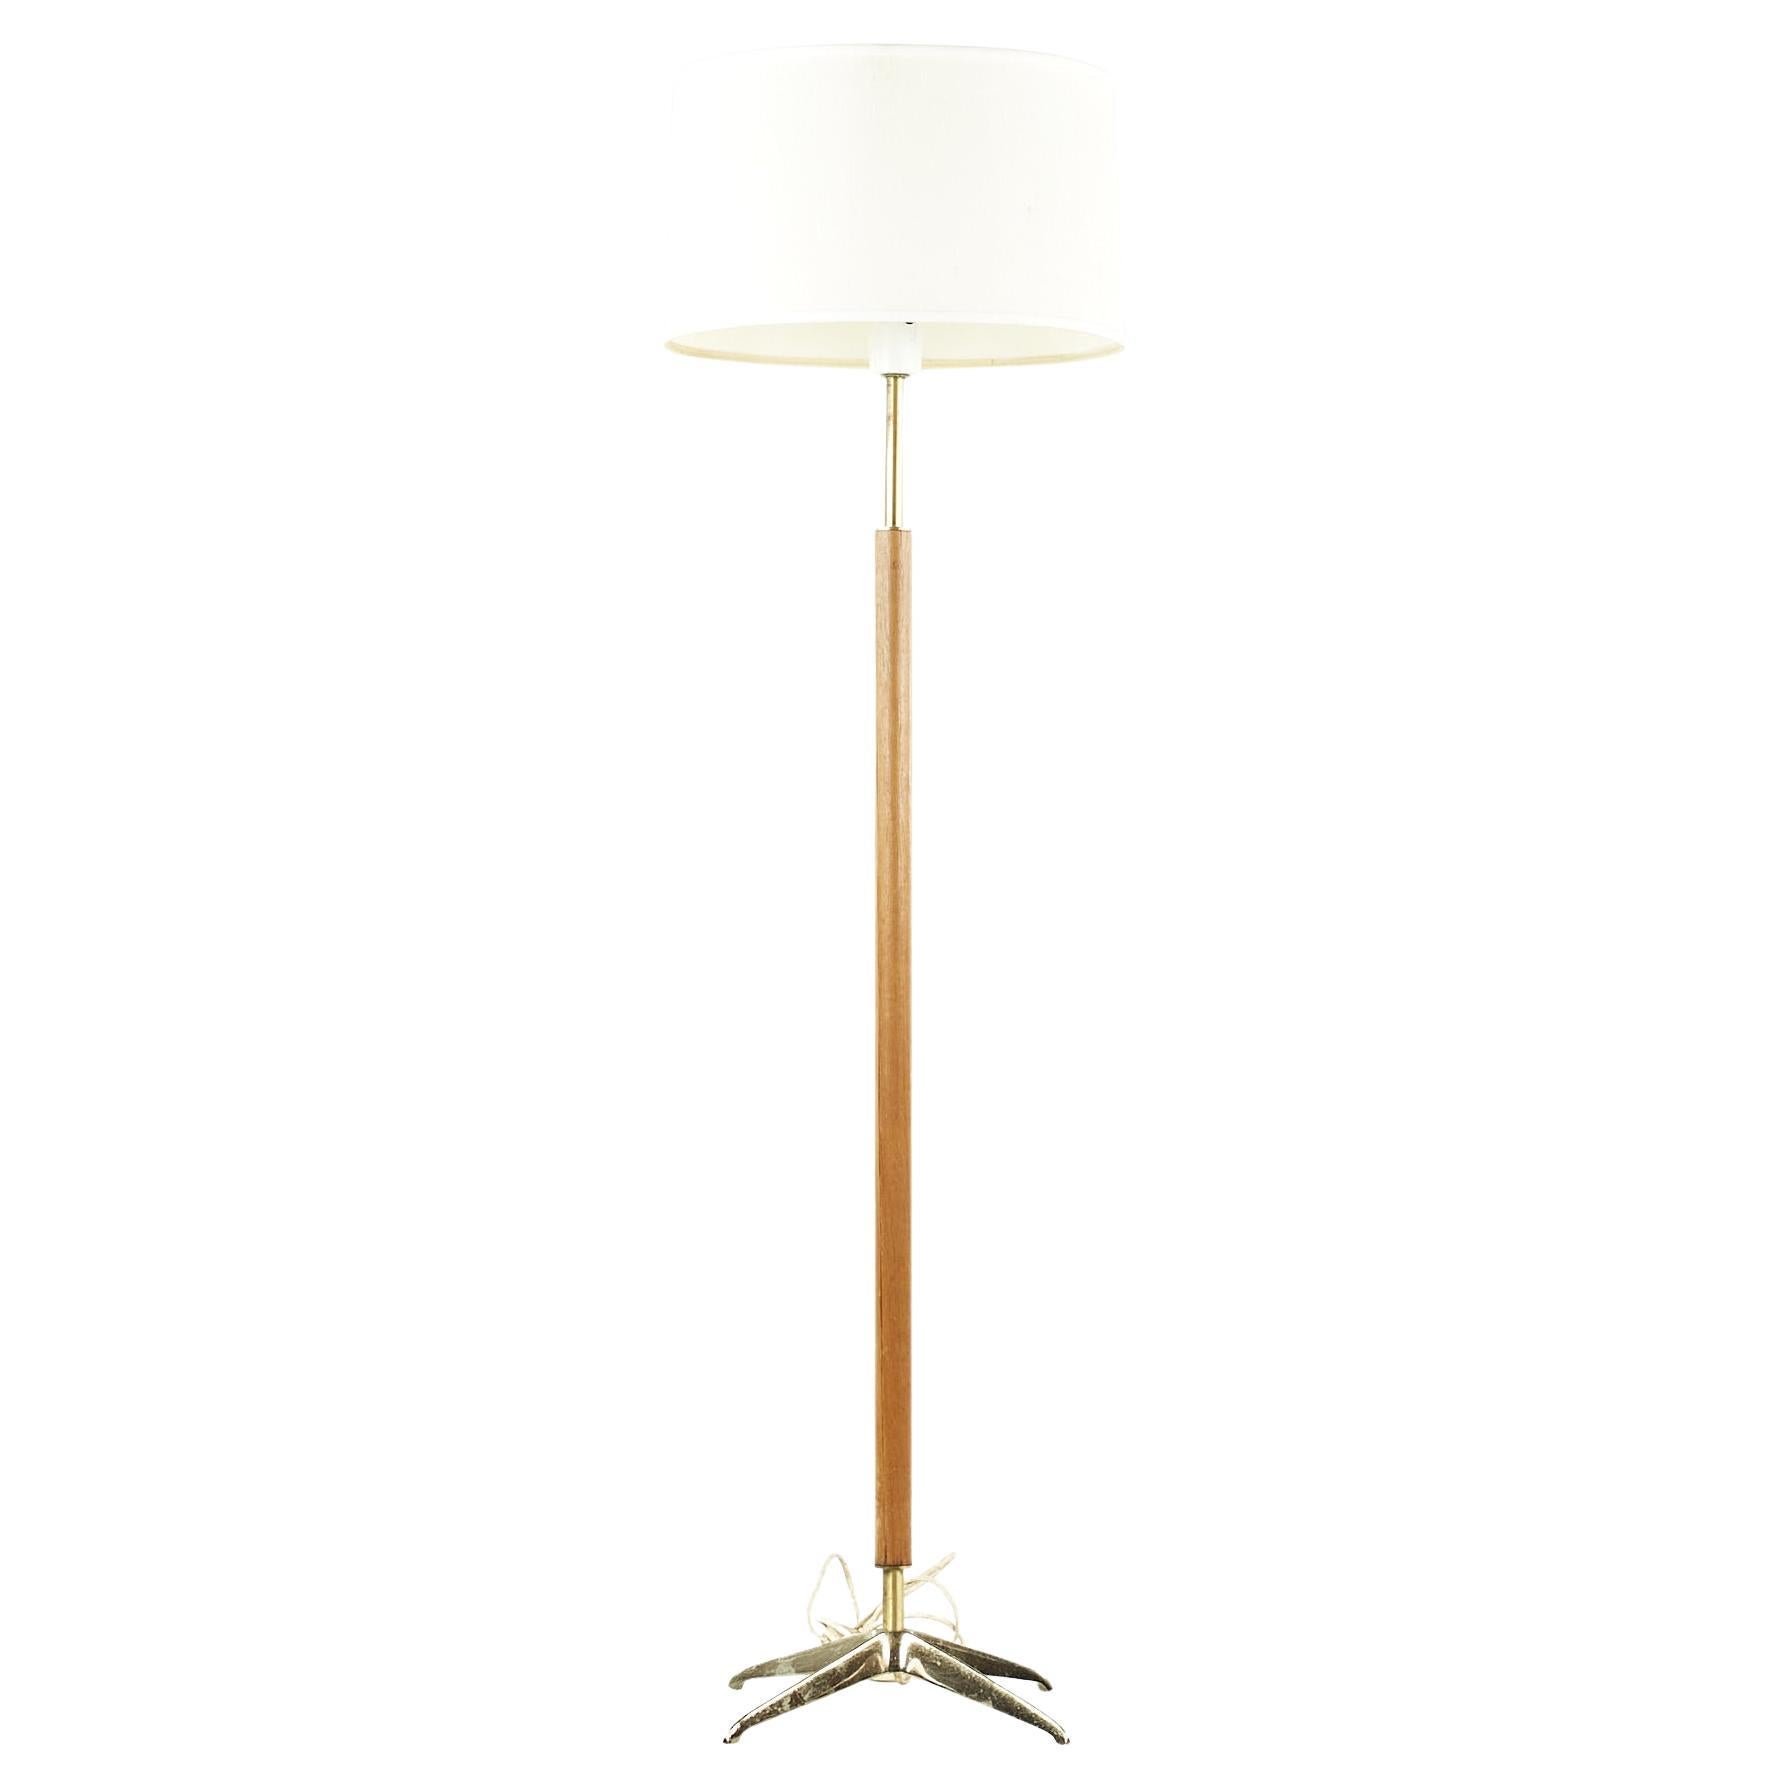 Gerald Thurston for Lightolier mid century walnut and brass floor lamp

This lamp measures: 15 wide x 15 deep x 54.5 inches high

This lamp is in Fair Vintage Condition with some separation of wood and brass patina

We take our photos in a